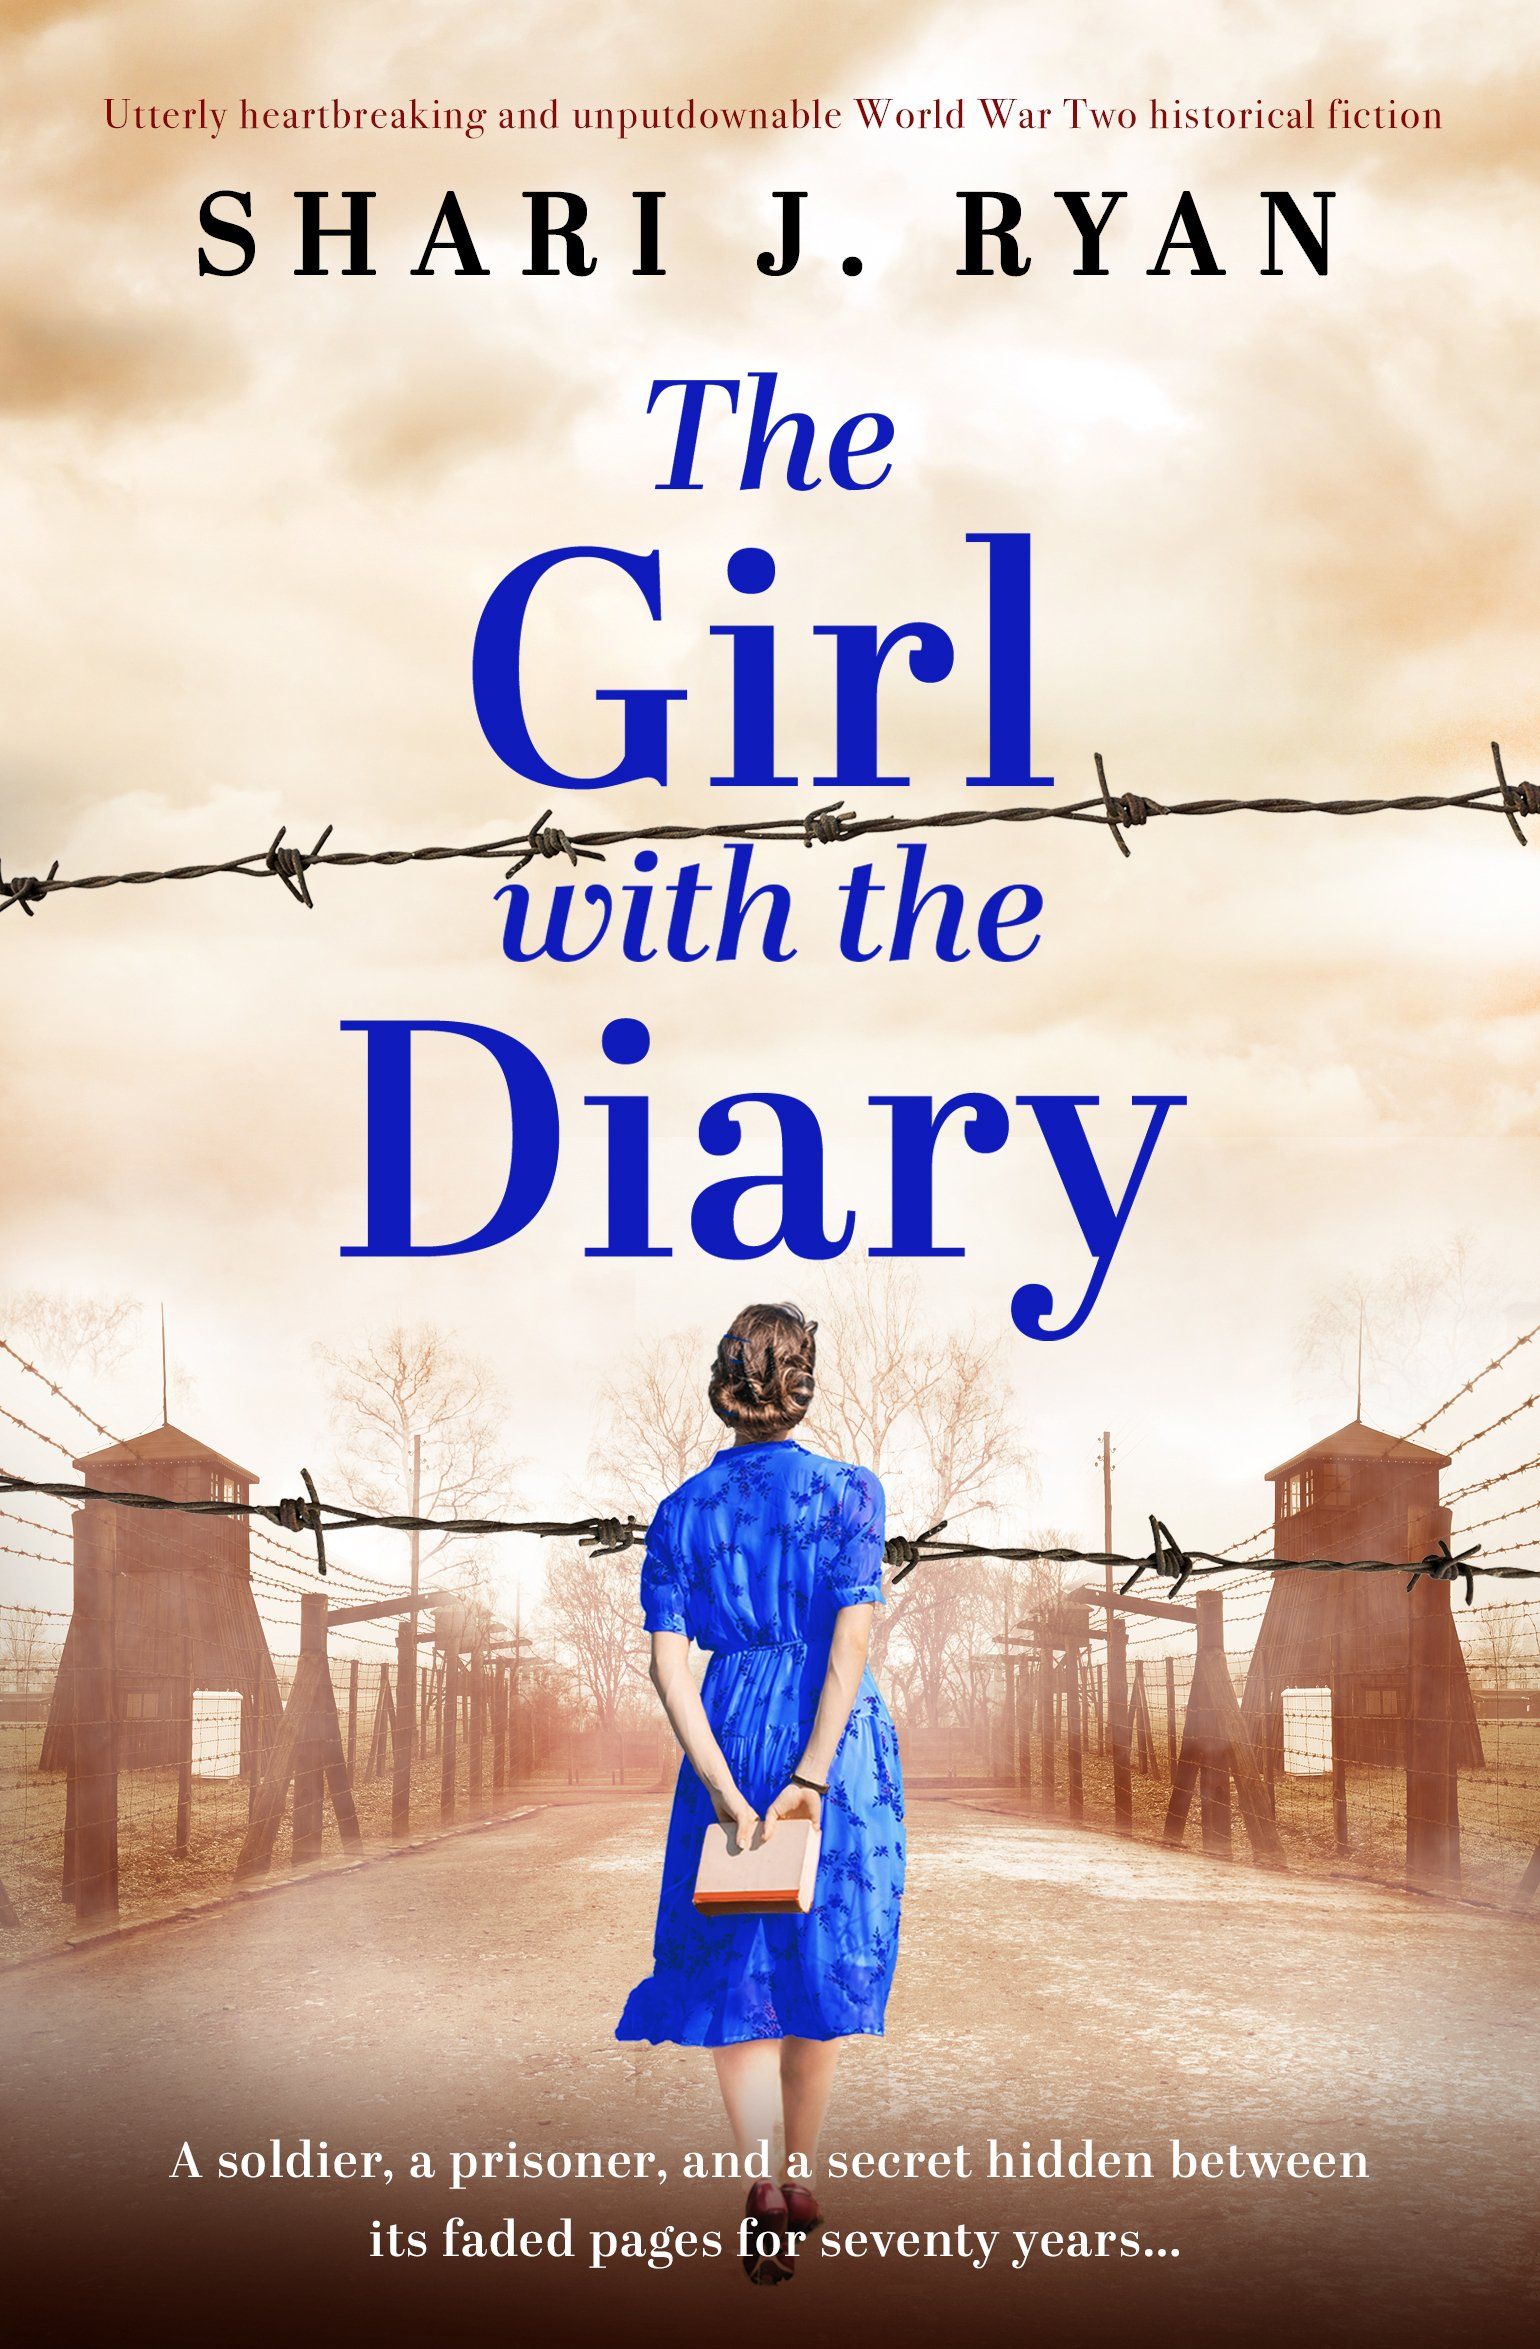 The Girl with the Diary by Shari J. Ryan